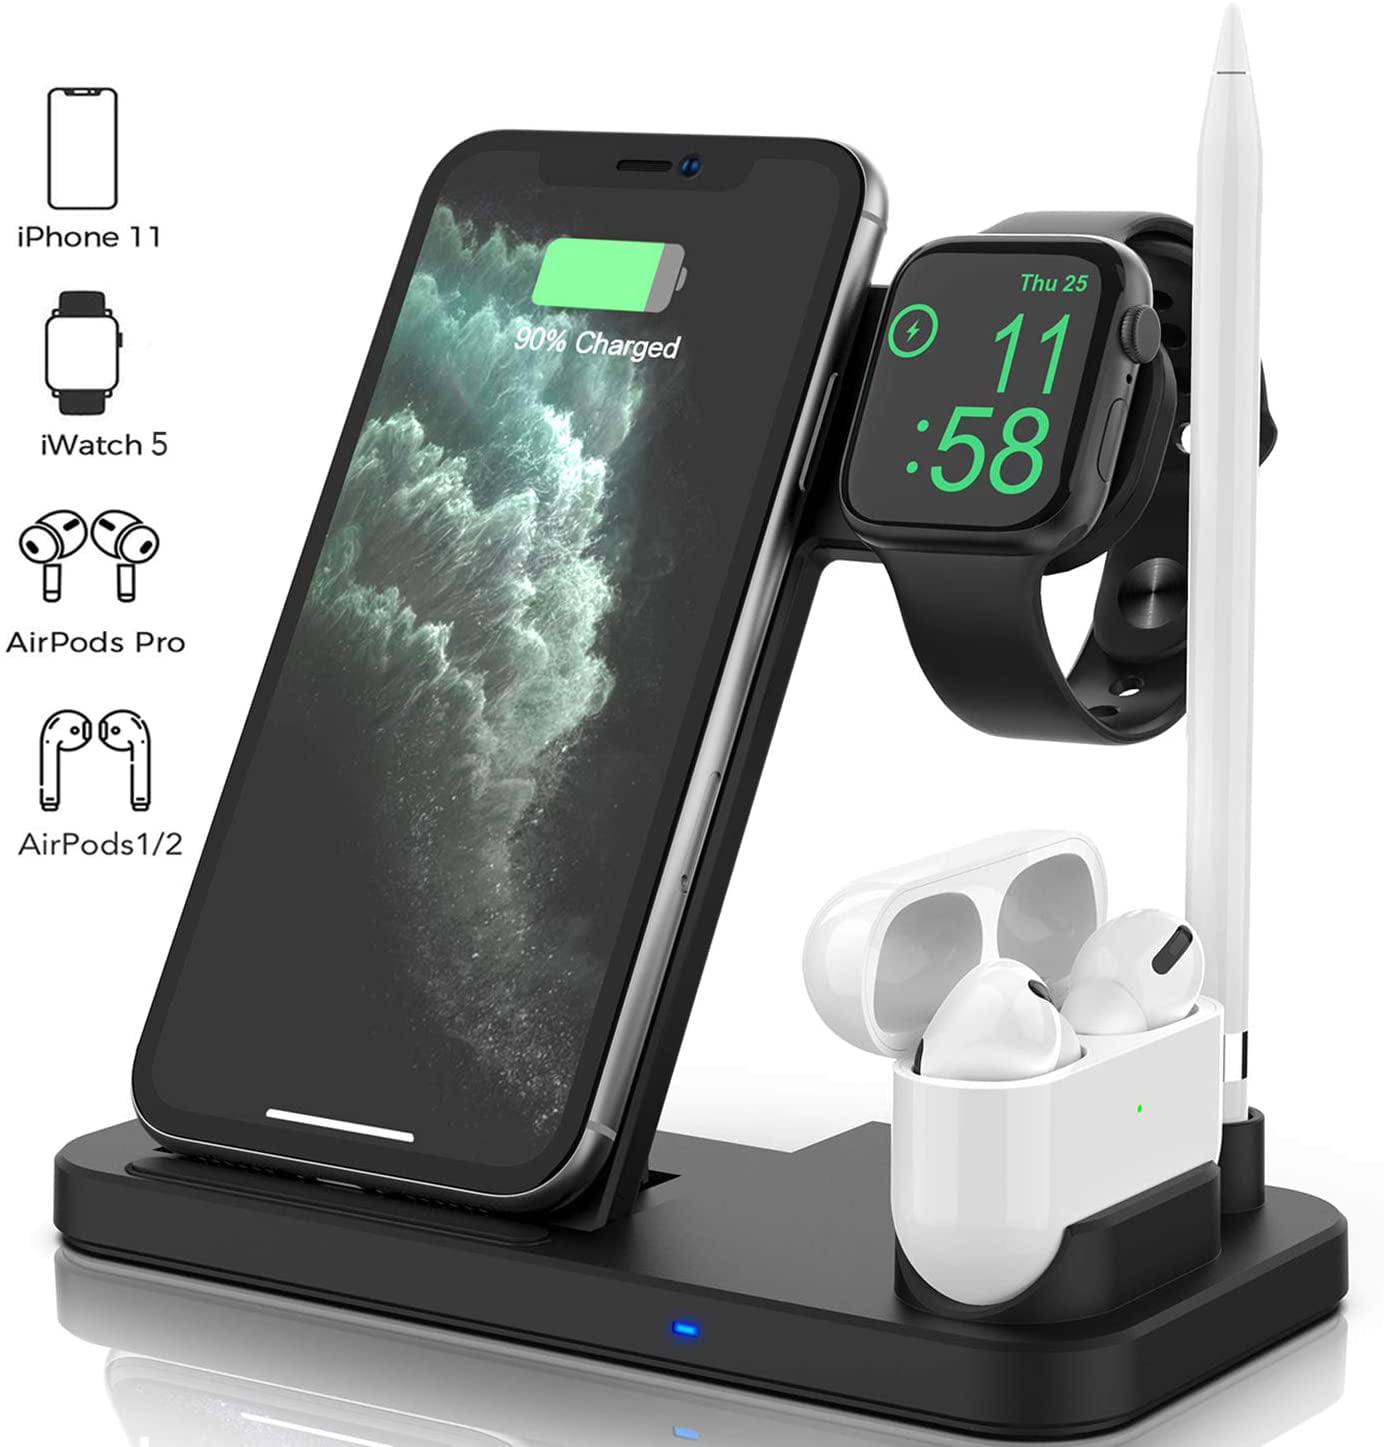 oorsprong Infecteren specificatie Wireless Charger Dock 4 in 1 Fast Charging Station,Quick Charger, Foldable  Adjustable Stand for iPhone SE/11/11 Pro Max/XR/XS Max, iWatch 5/4/3/2/1  Airpods Pro/2/1 Apple Pencil - Walmart.com